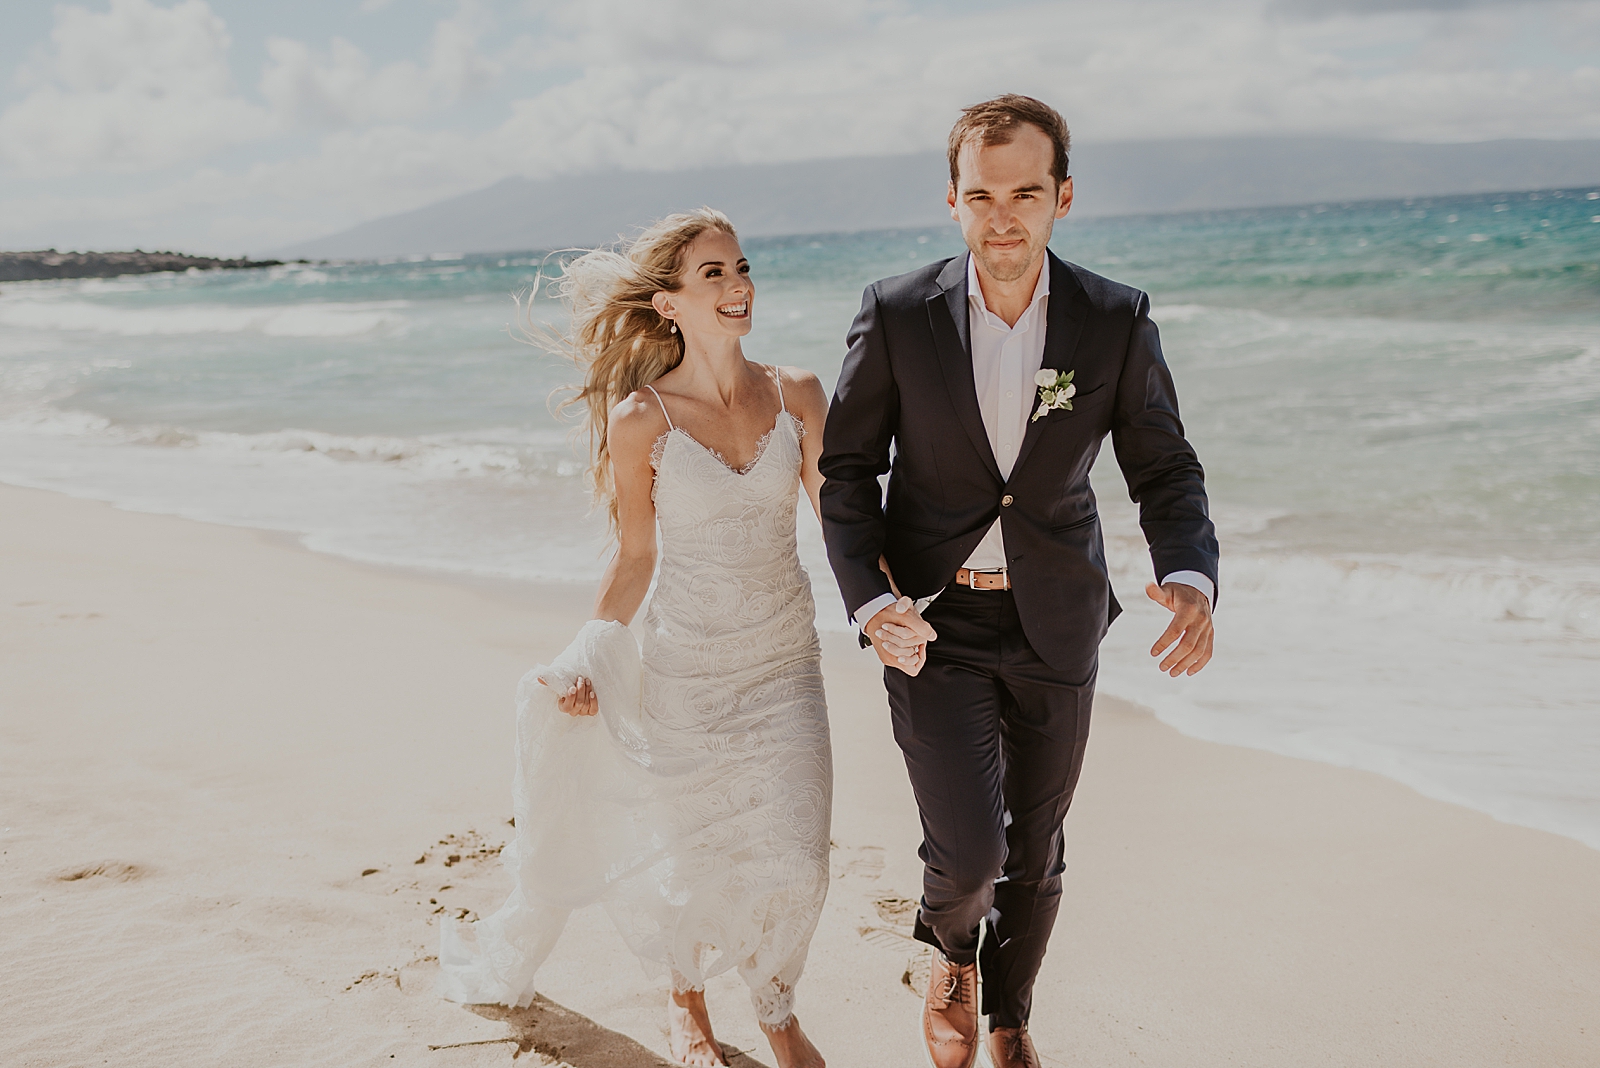 Bride and Groom holding hands and running on the beach along the ocean shoreline